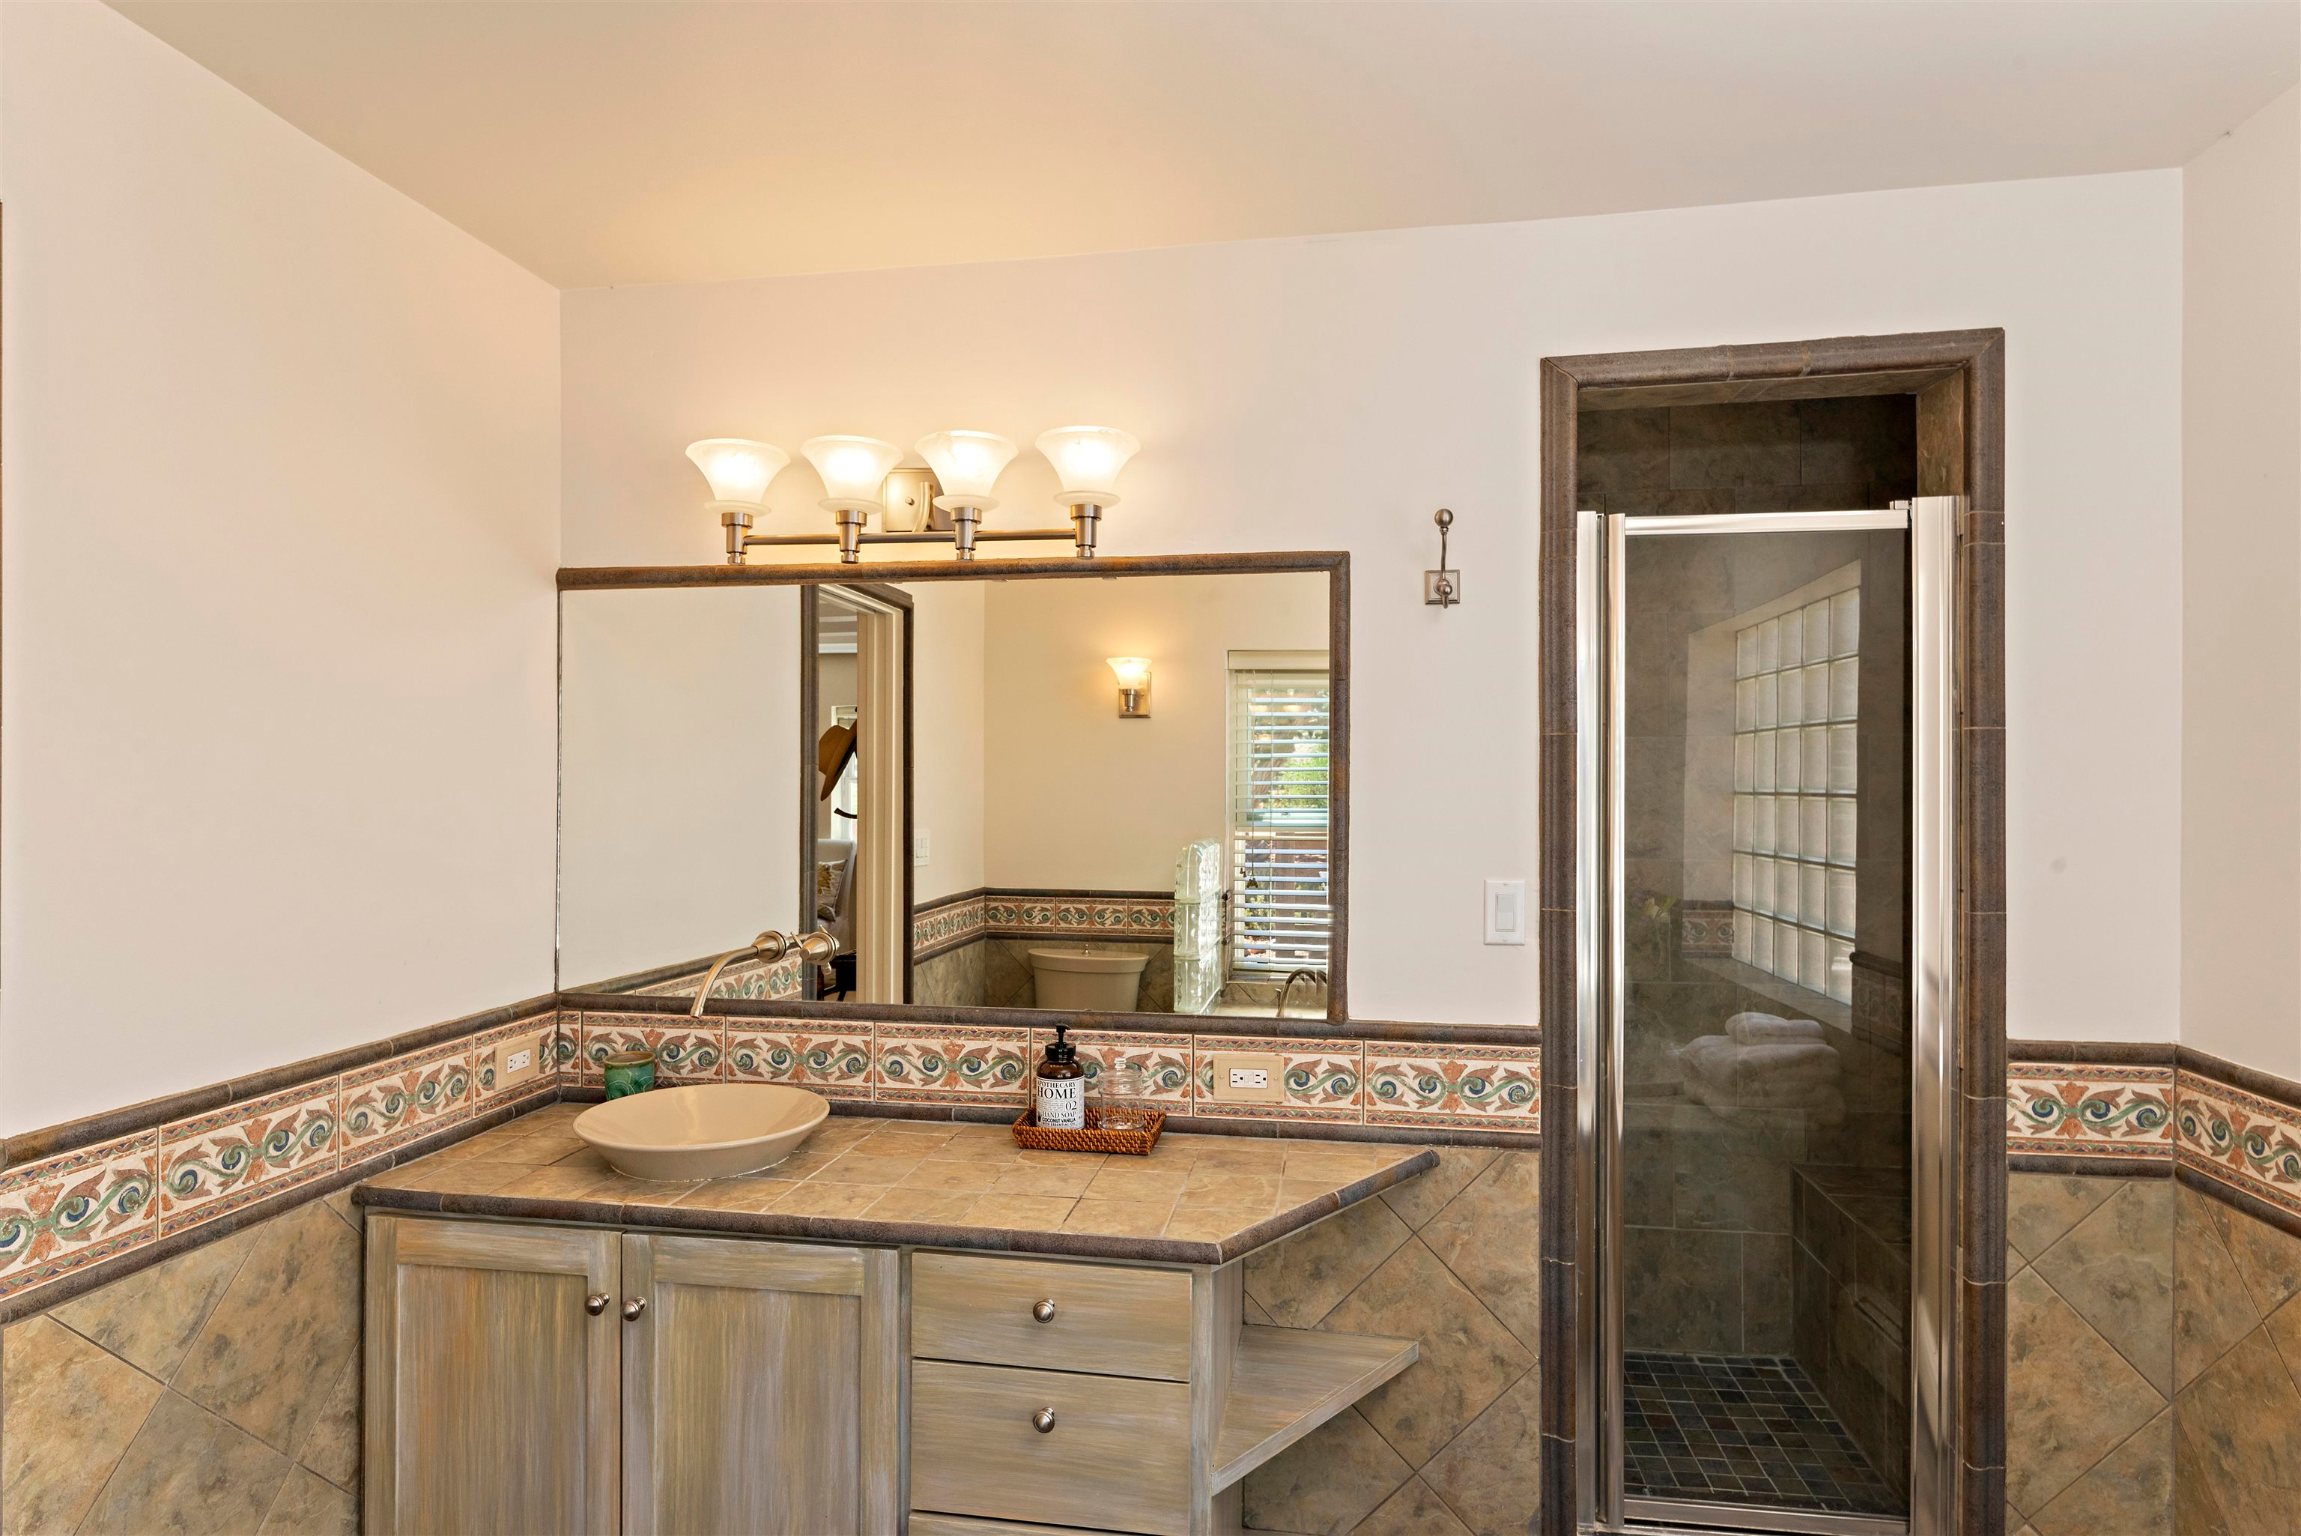 172 Wolf Road, Santa Fe, New Mexico 87508-6708, 2 Bedrooms Bedrooms, ,2 BathroomsBathrooms,Residential,For Sale,172 Wolf Road,202202327